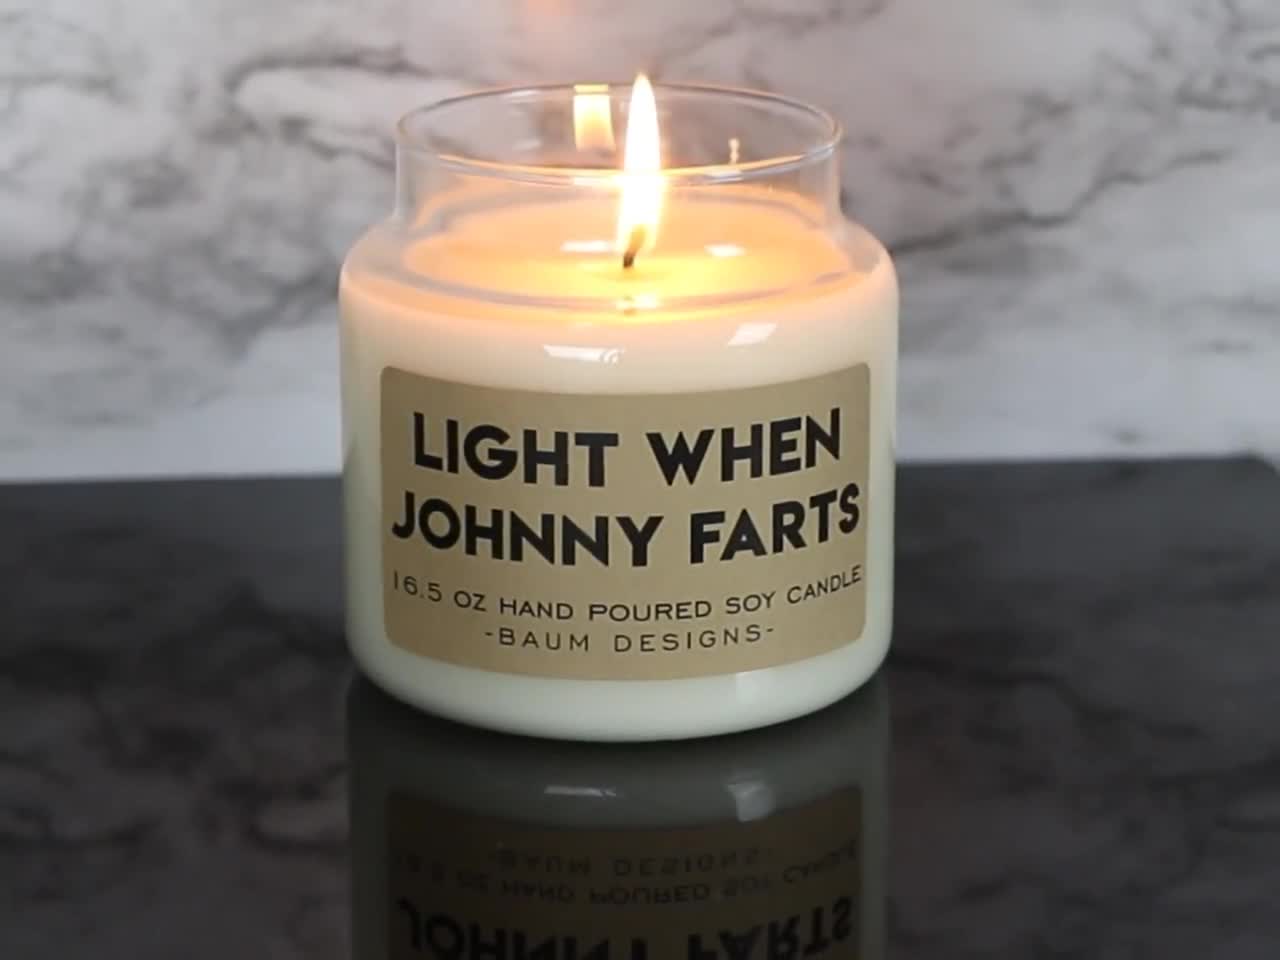 Candles - Mother Fucking Homeowner - Housewarming Gifts - Soy Wax Blend -  35 Hour Burn Time - Nice Stuff for Mom – Nice Stuff For Mom